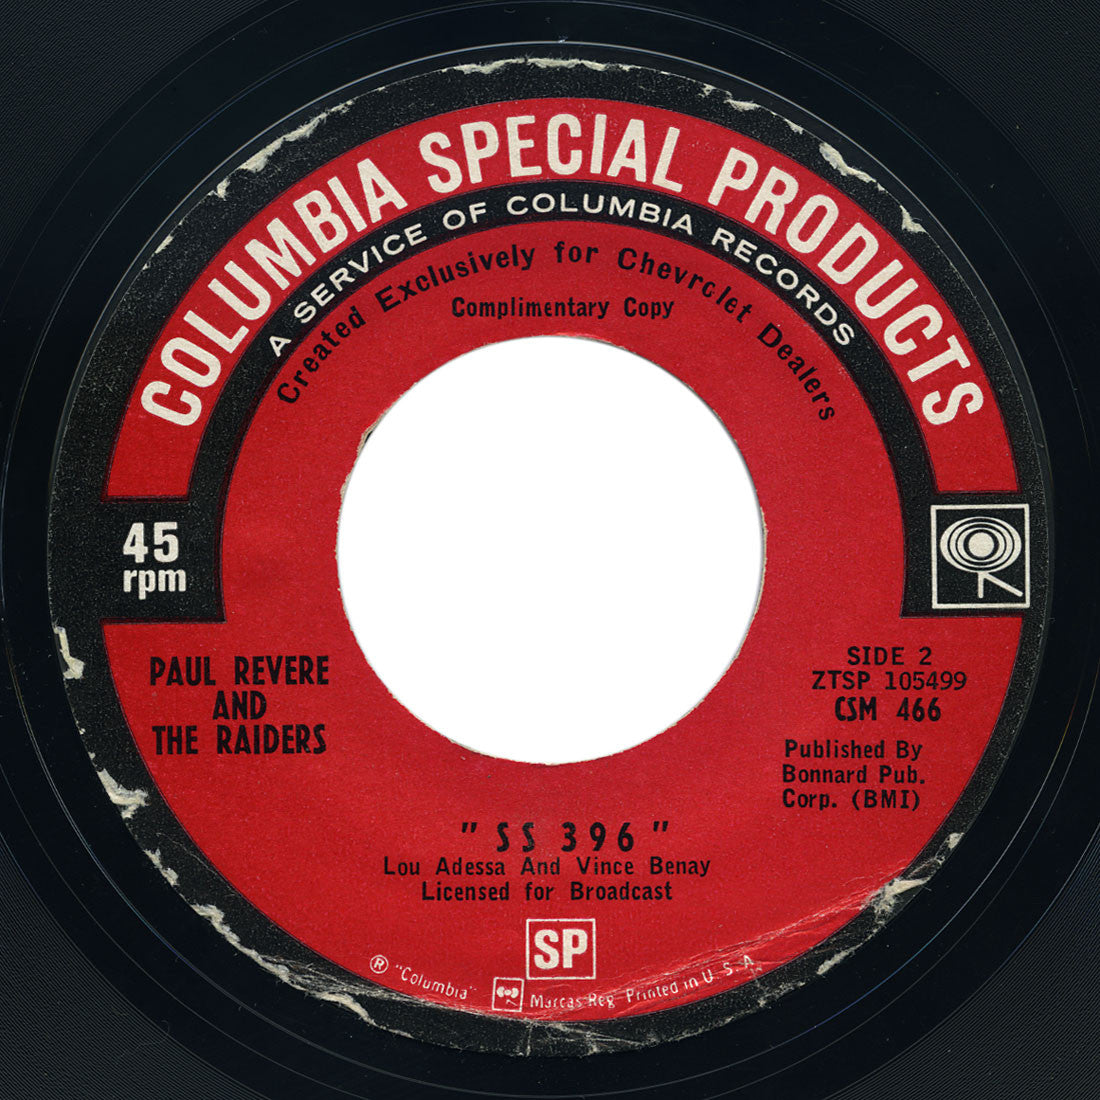 Paul Revere And The Raiders – “SS 396”– Columbia Special Products